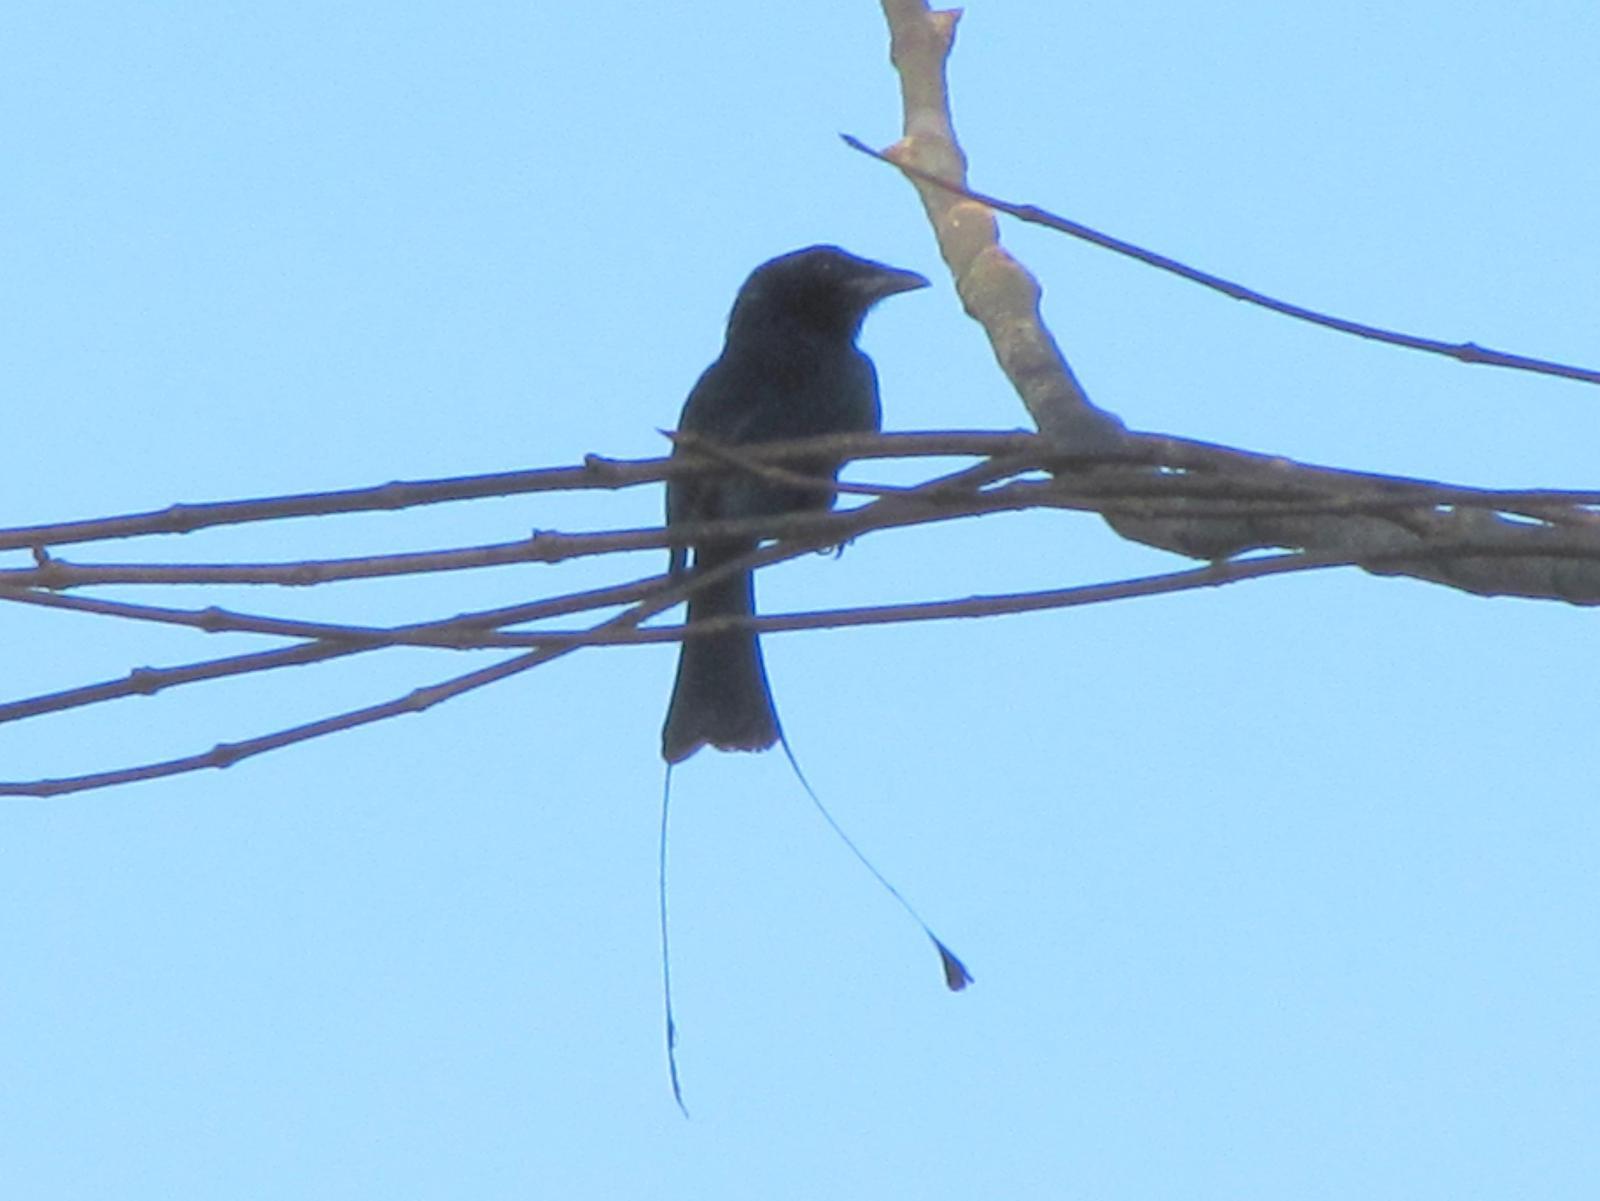 Greater Racket-tailed Drongo Photo by Jeff Harding